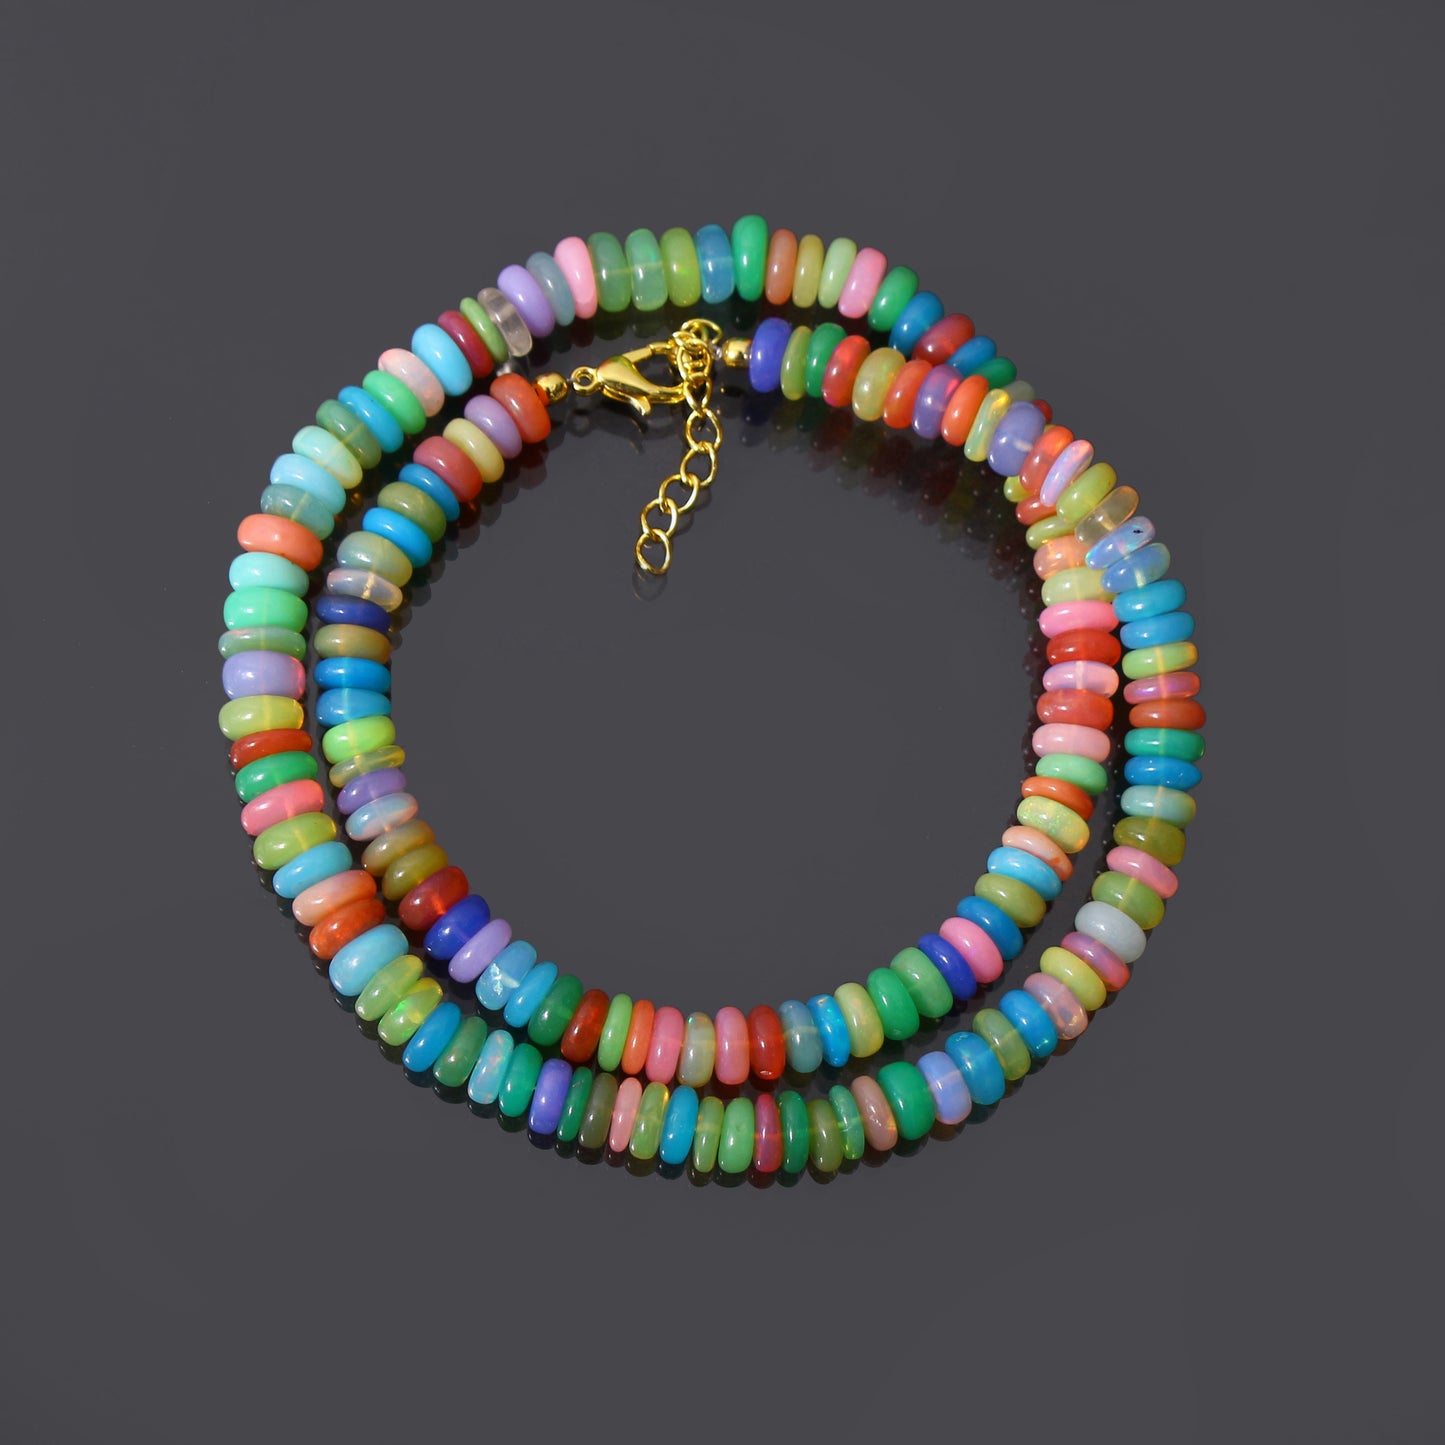 Rainbow Designer Candy Opal Gem Stone Necklace - Multi Color Beads Necklace Has Silver Clasp